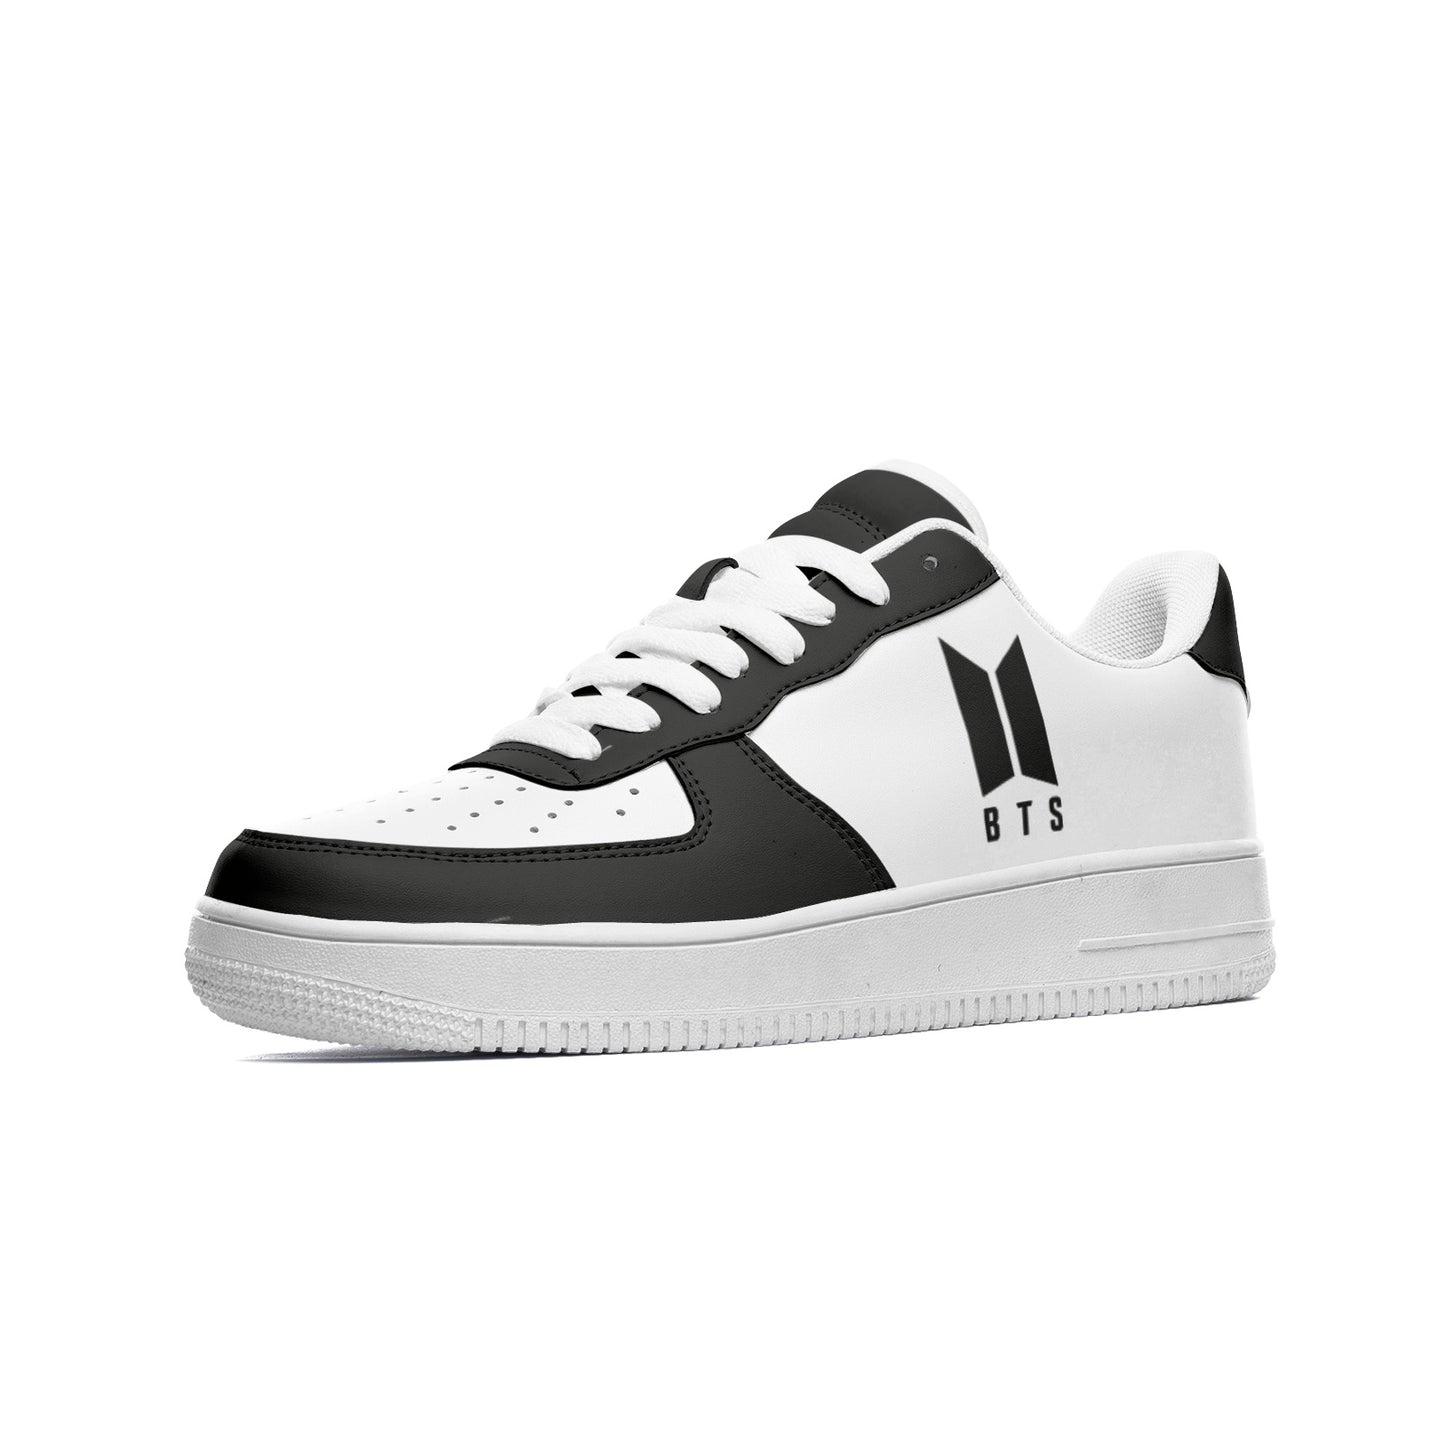 BTS Logo Unisex Low Top Leather Sneakers Black - SD-style-shop